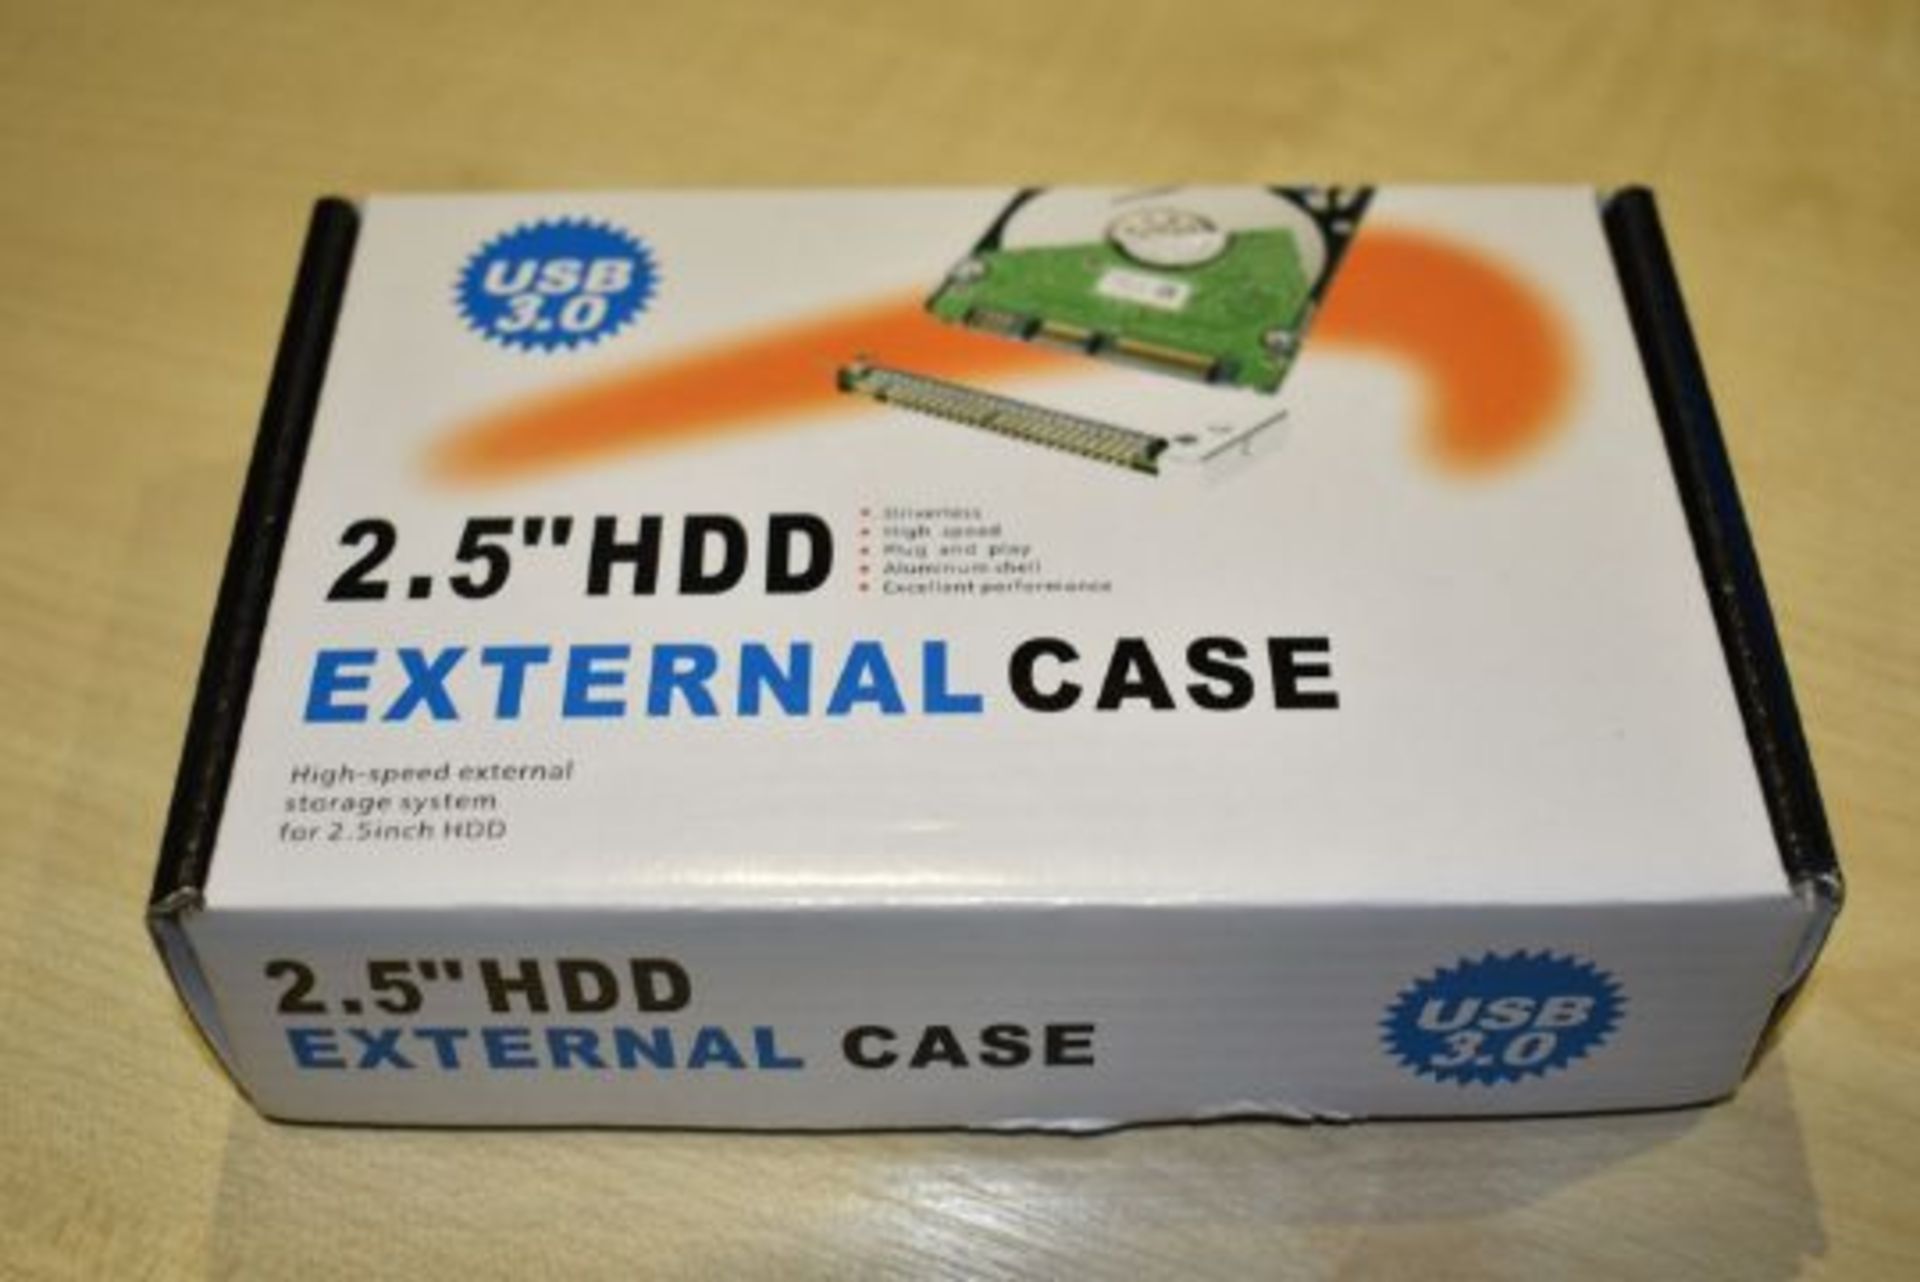 1 x External 750gb Hard Drive - Fast USB 3.0 External Drive With Aluminum Case, Carry Pouch and - Image 2 of 4